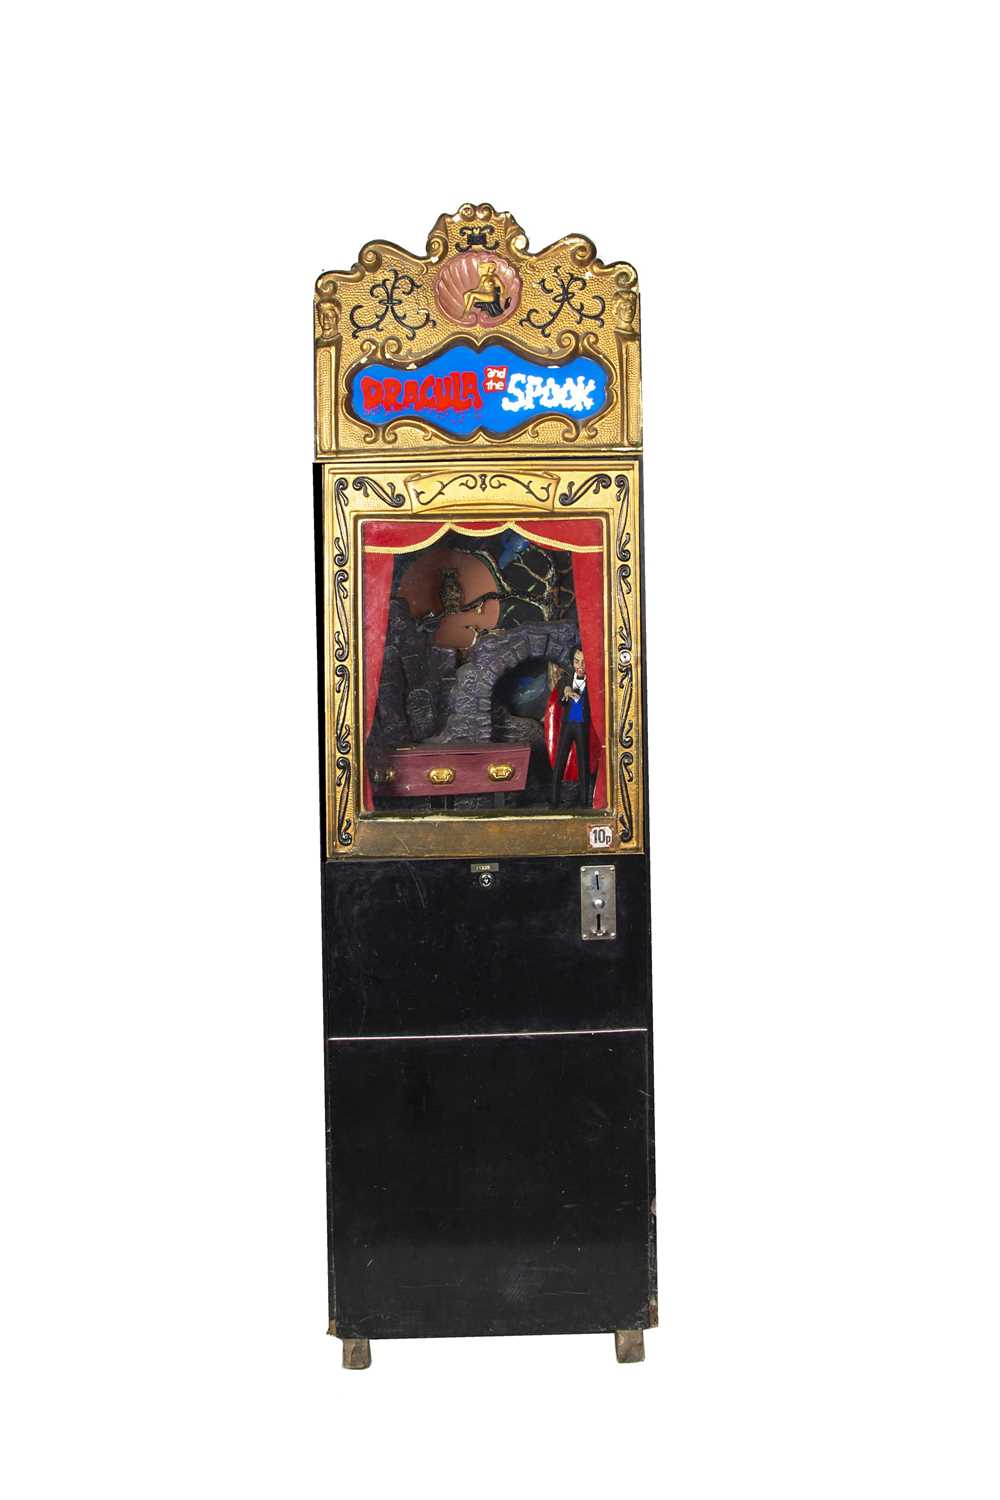 Lot 452 - A rare Animated Amusements Ltd Penny in the Slot working model ‘Dracula and the Spook’ arcade machine circa 1960